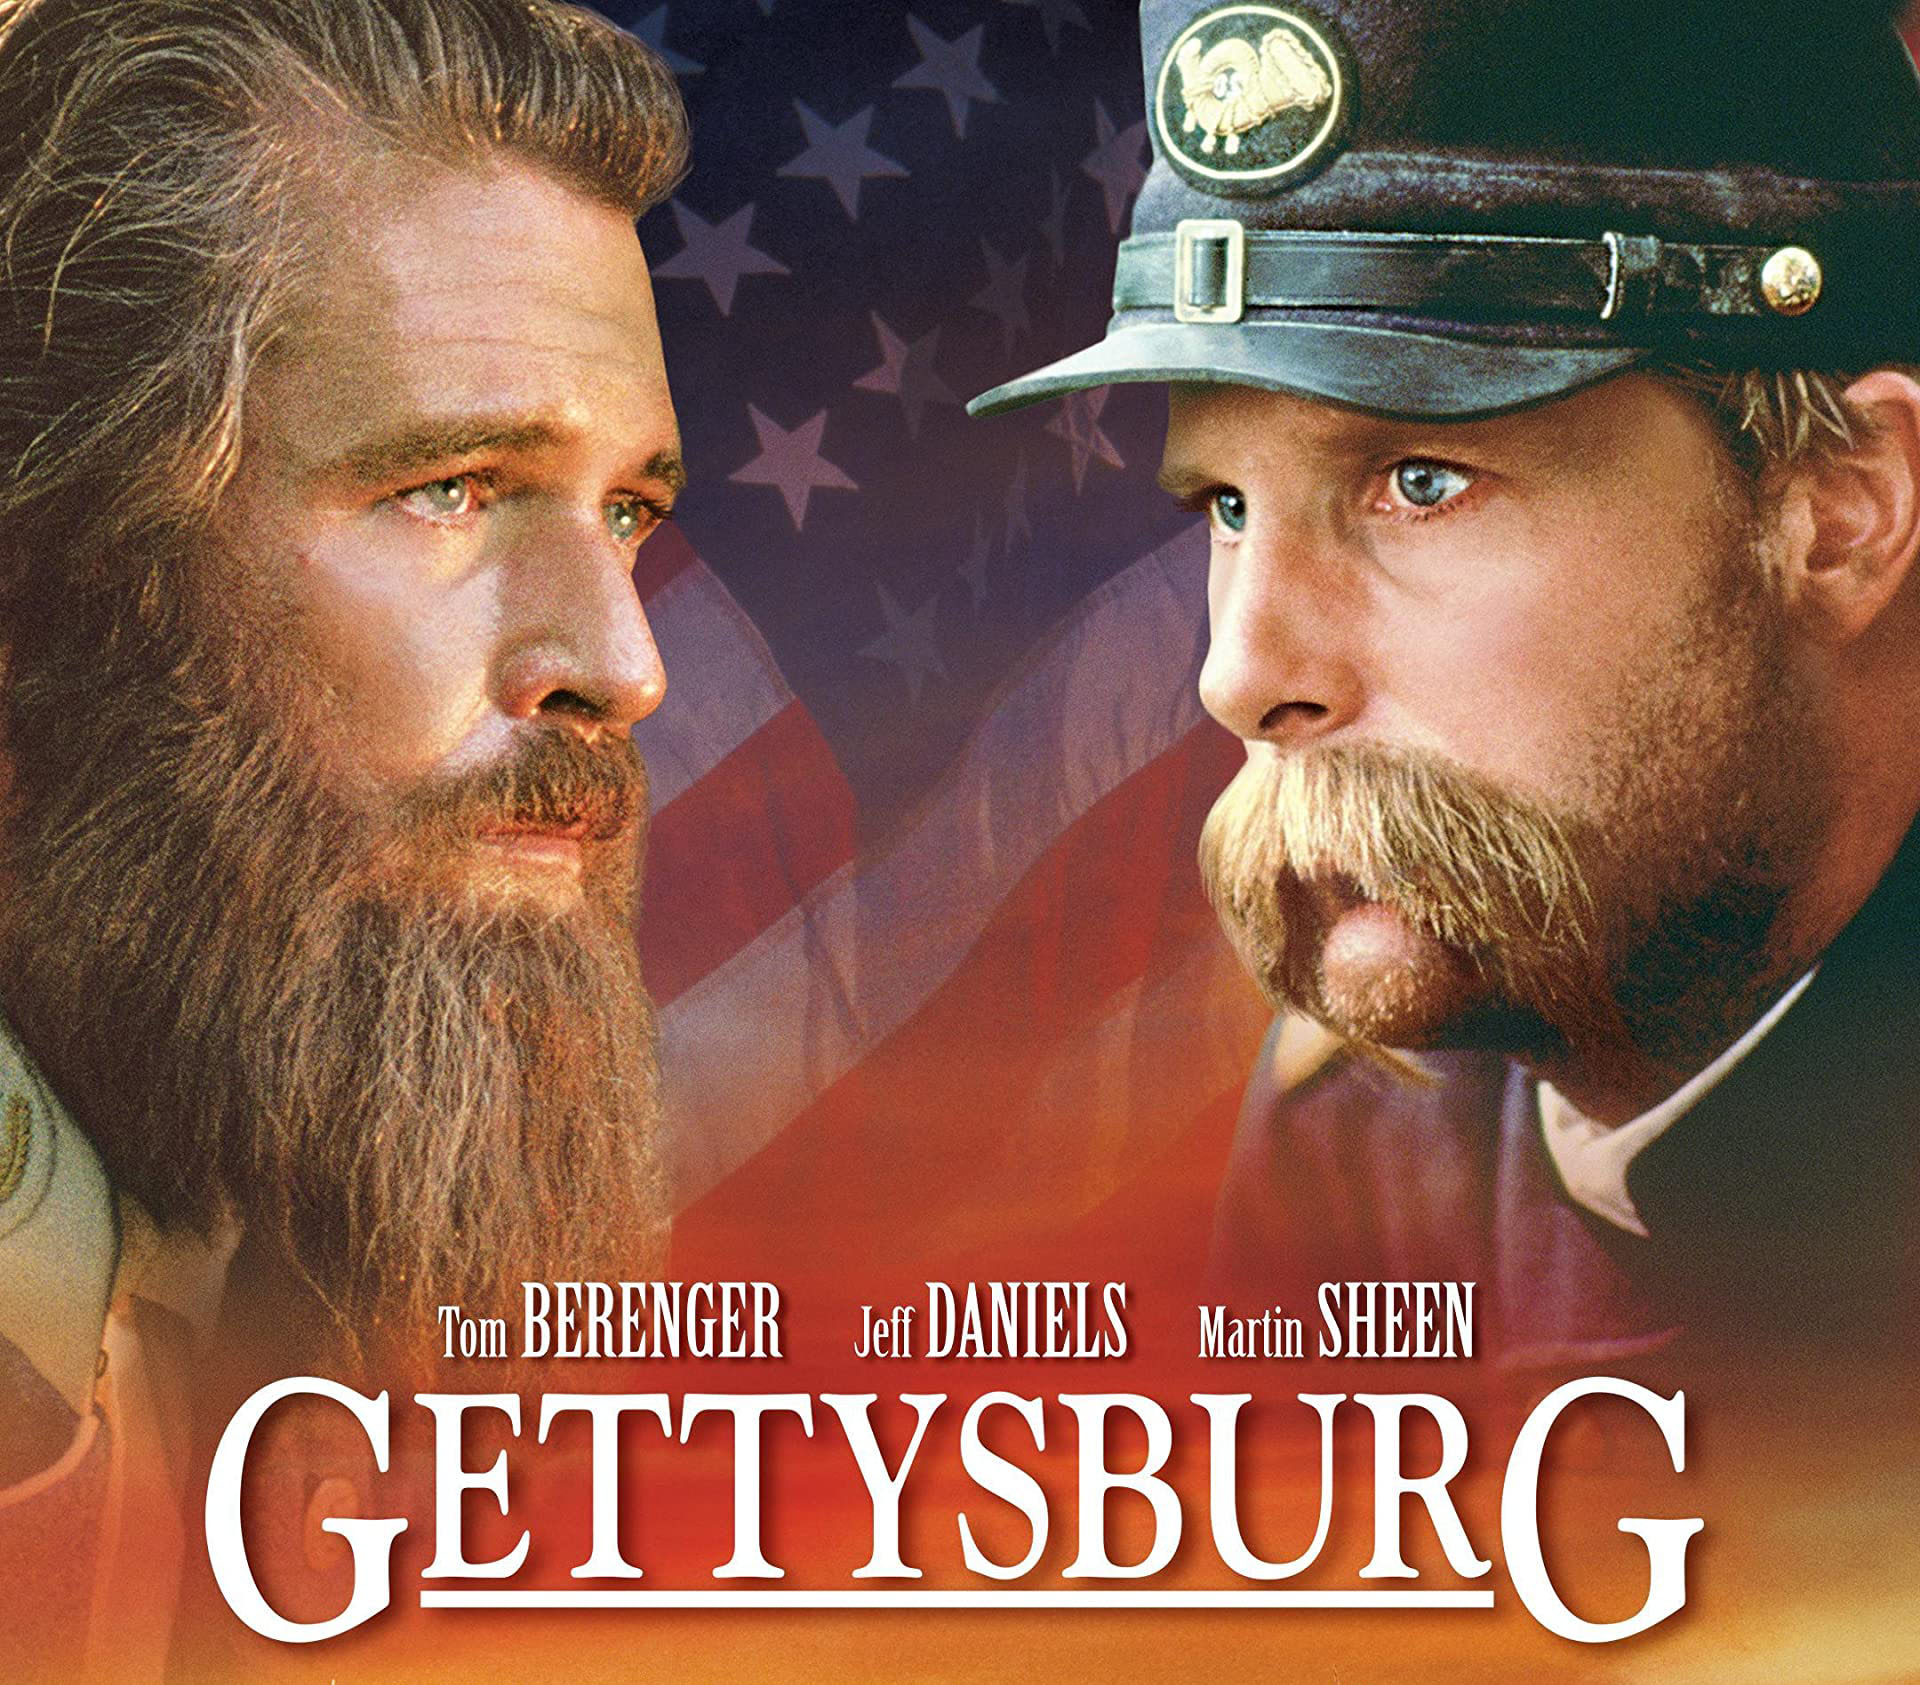 Gettysburg film poster with two lead characters